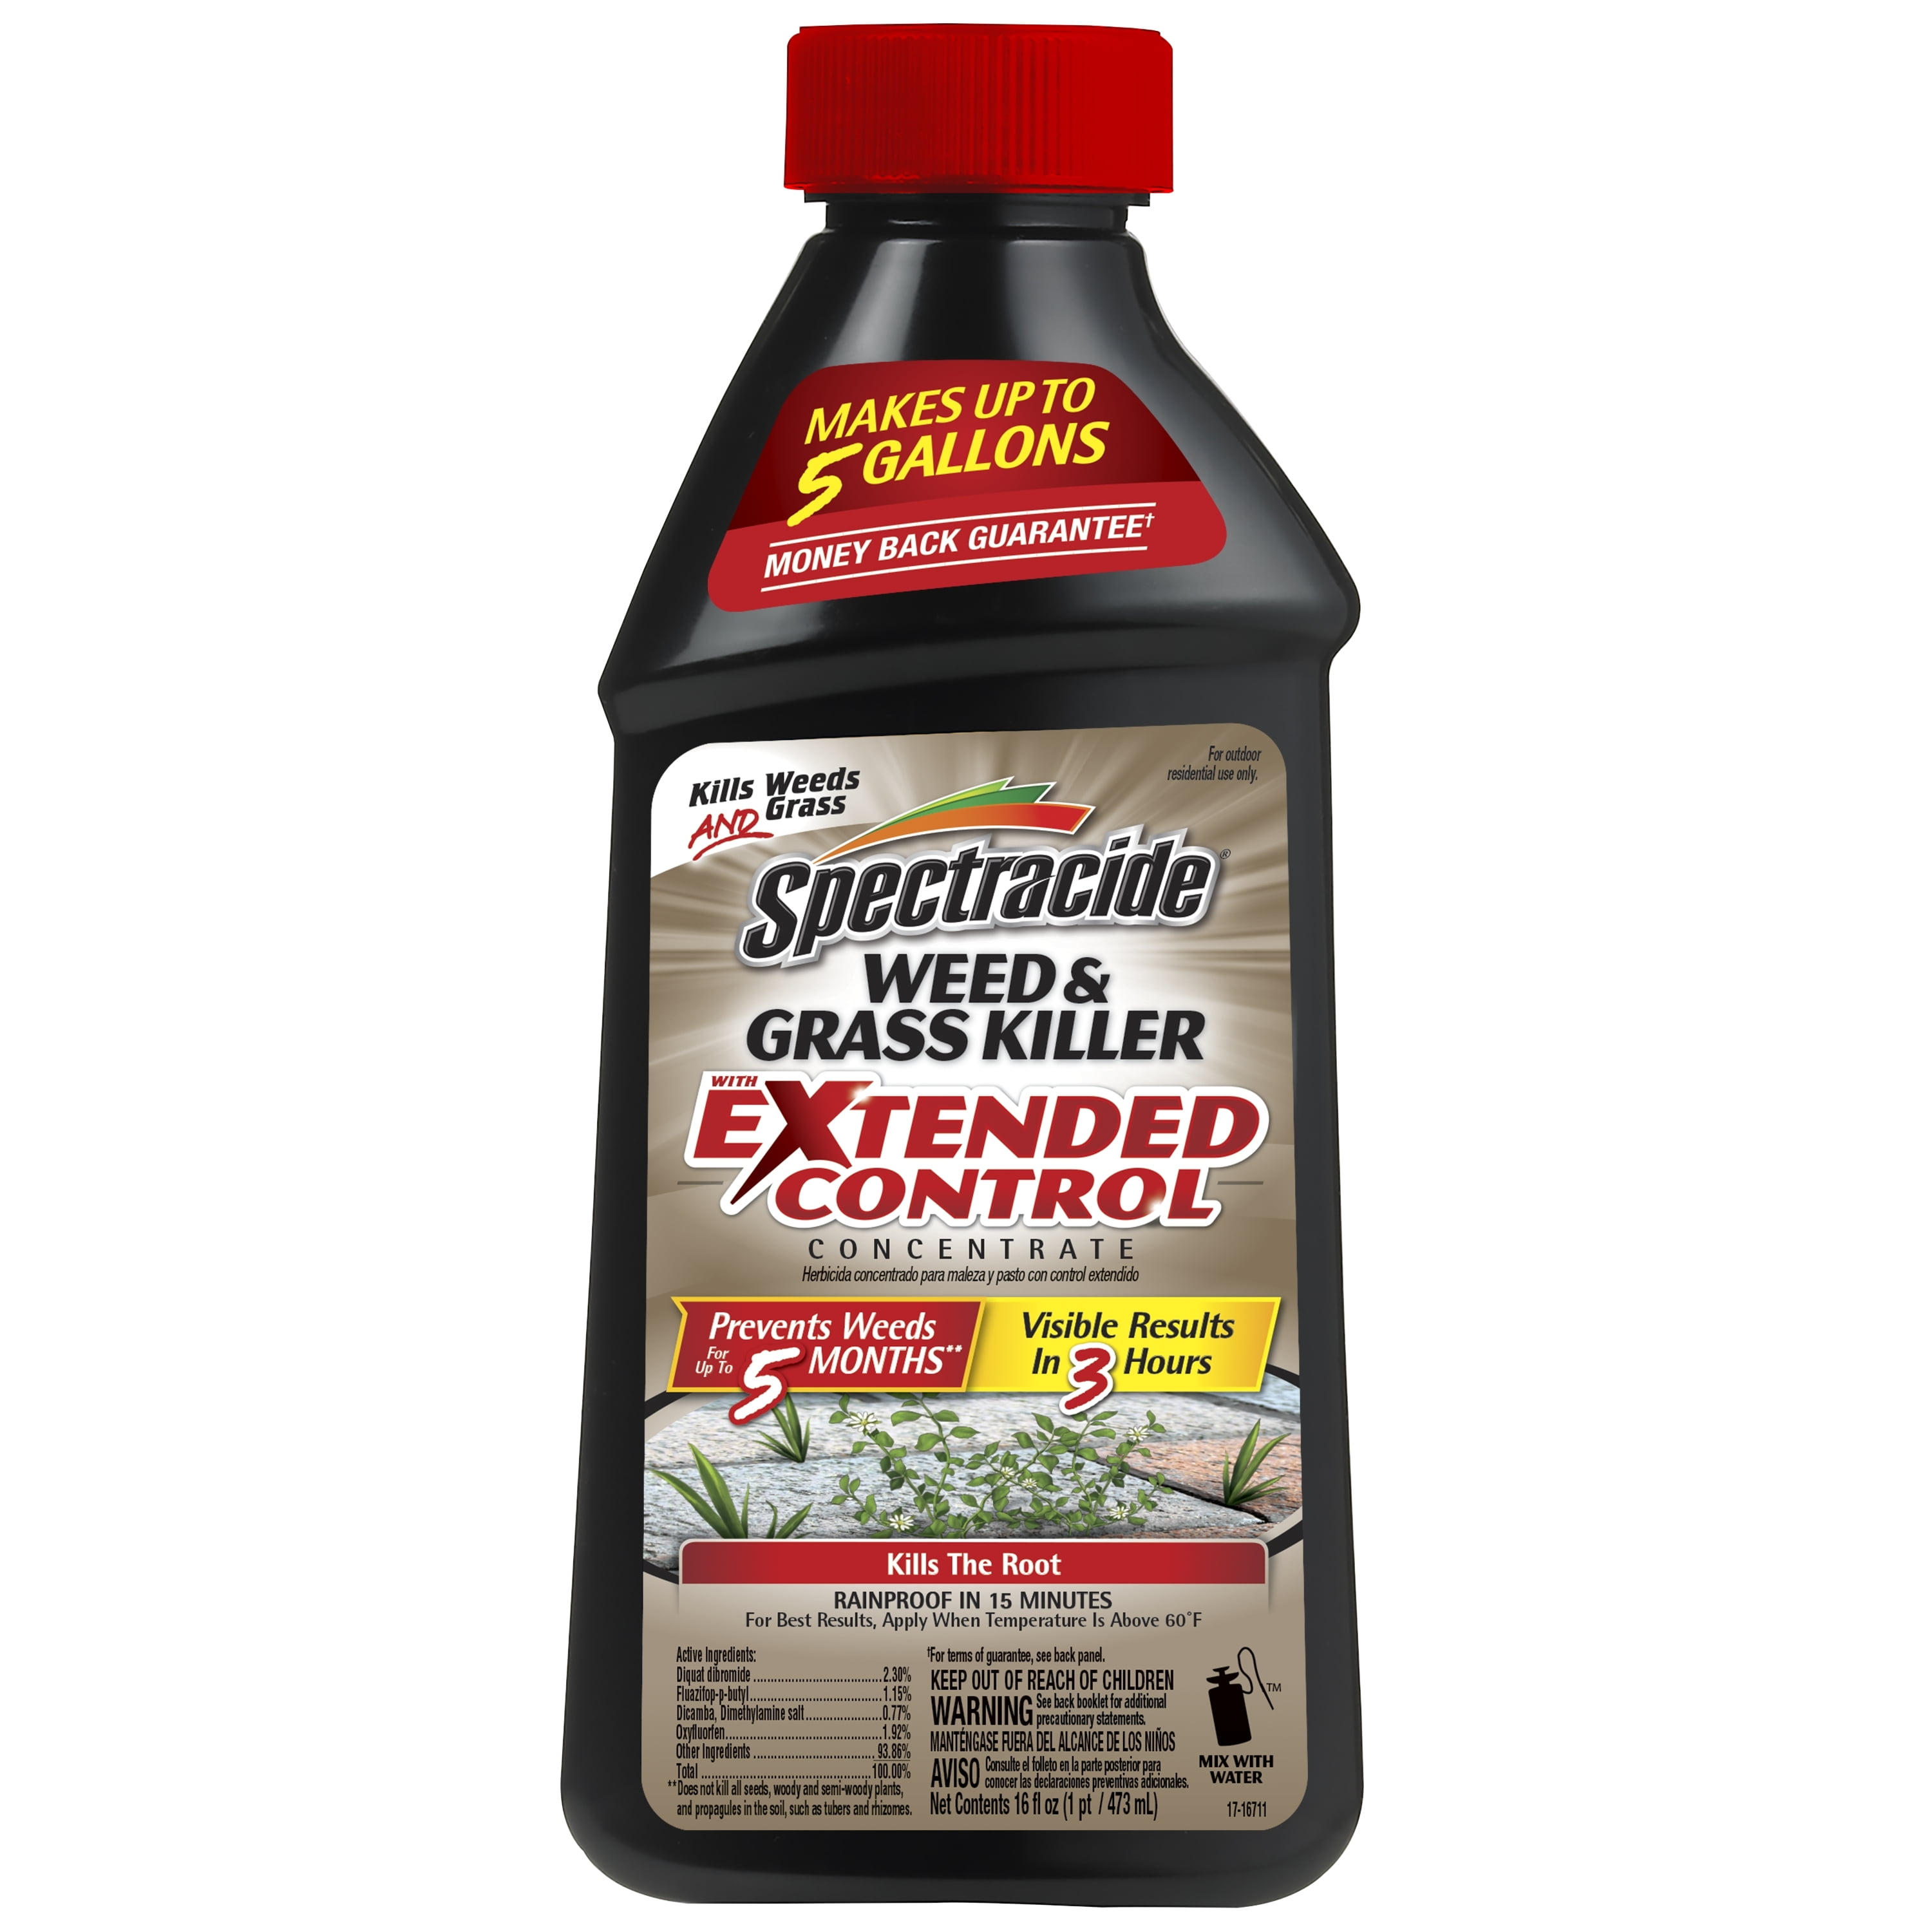 Spectracide Weed Grass Killer With Extended Control Concentrate 16